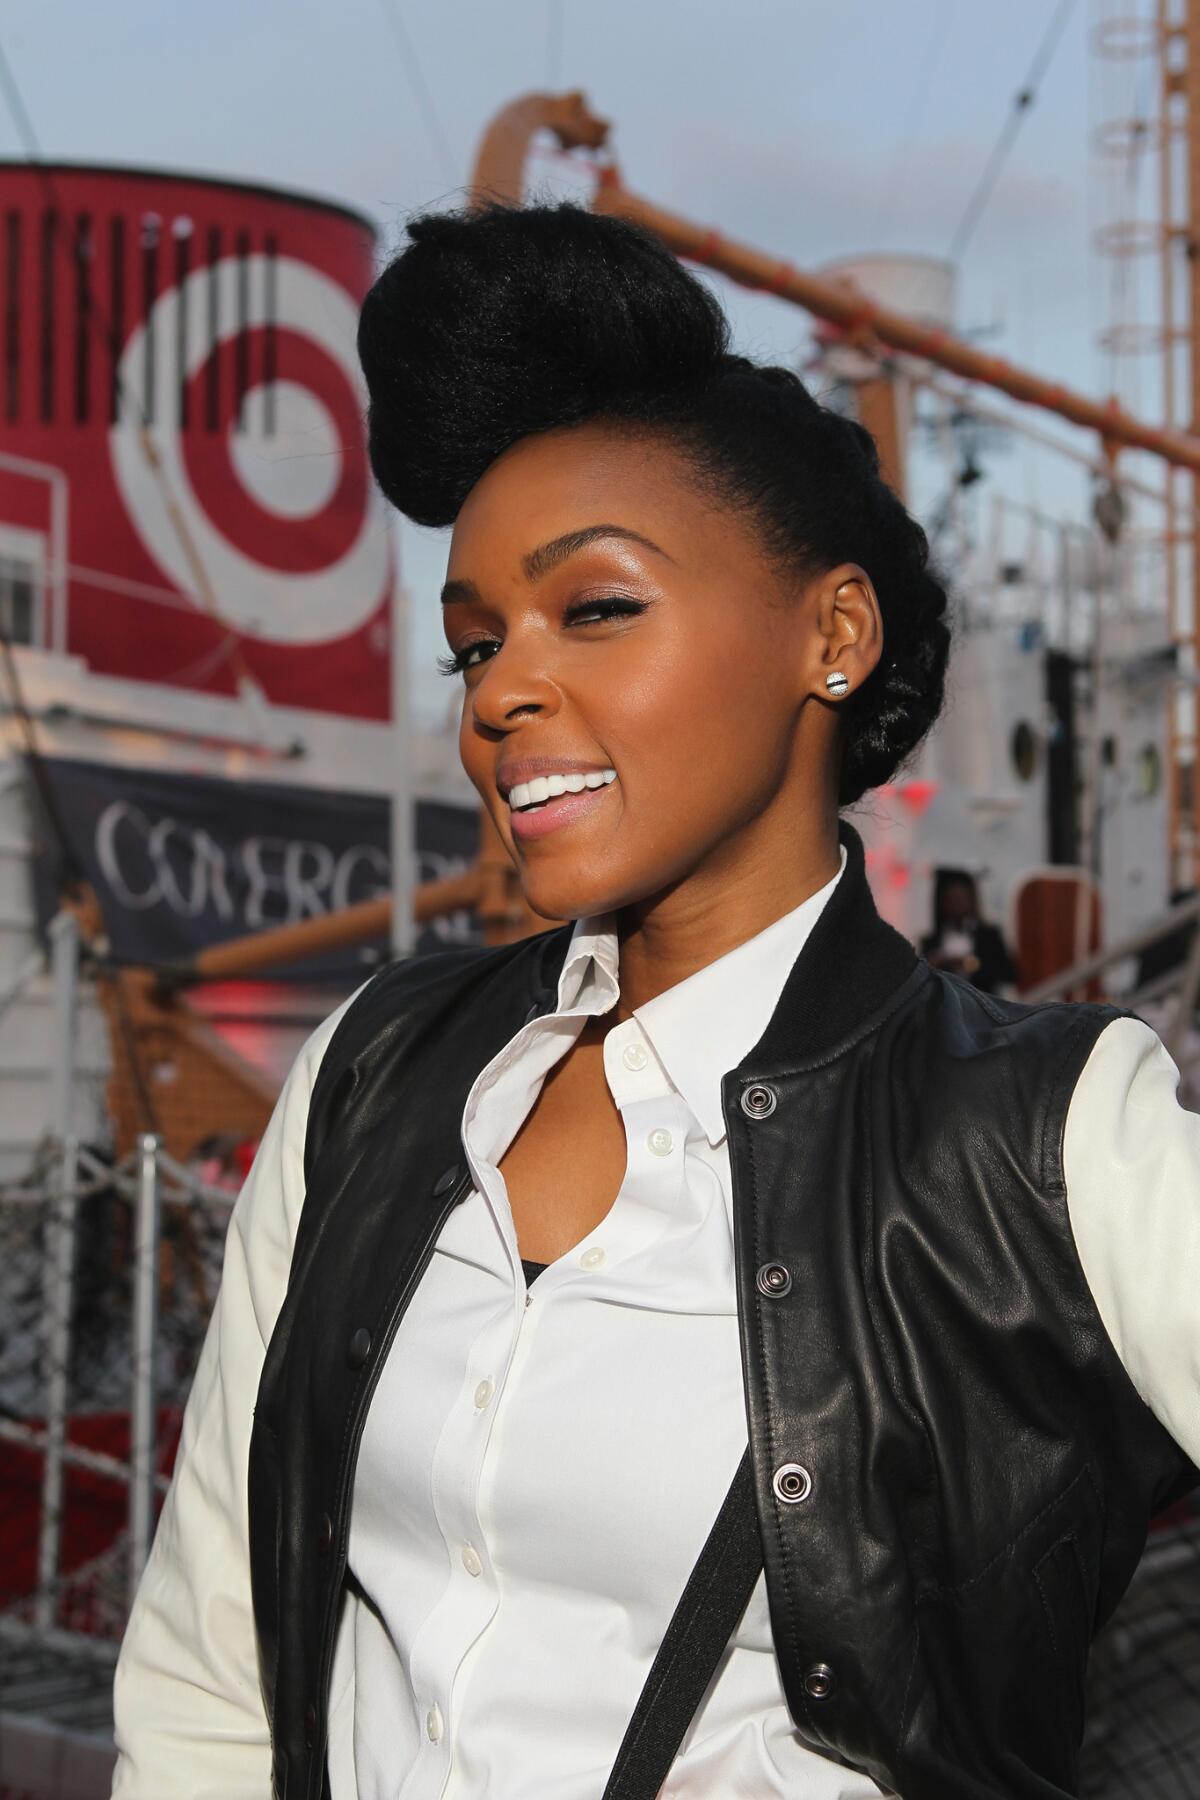 Janelle Monae celebrating the release of her new album "The Electric Lady" at Pier 84 on September 9, 2013 in New York.